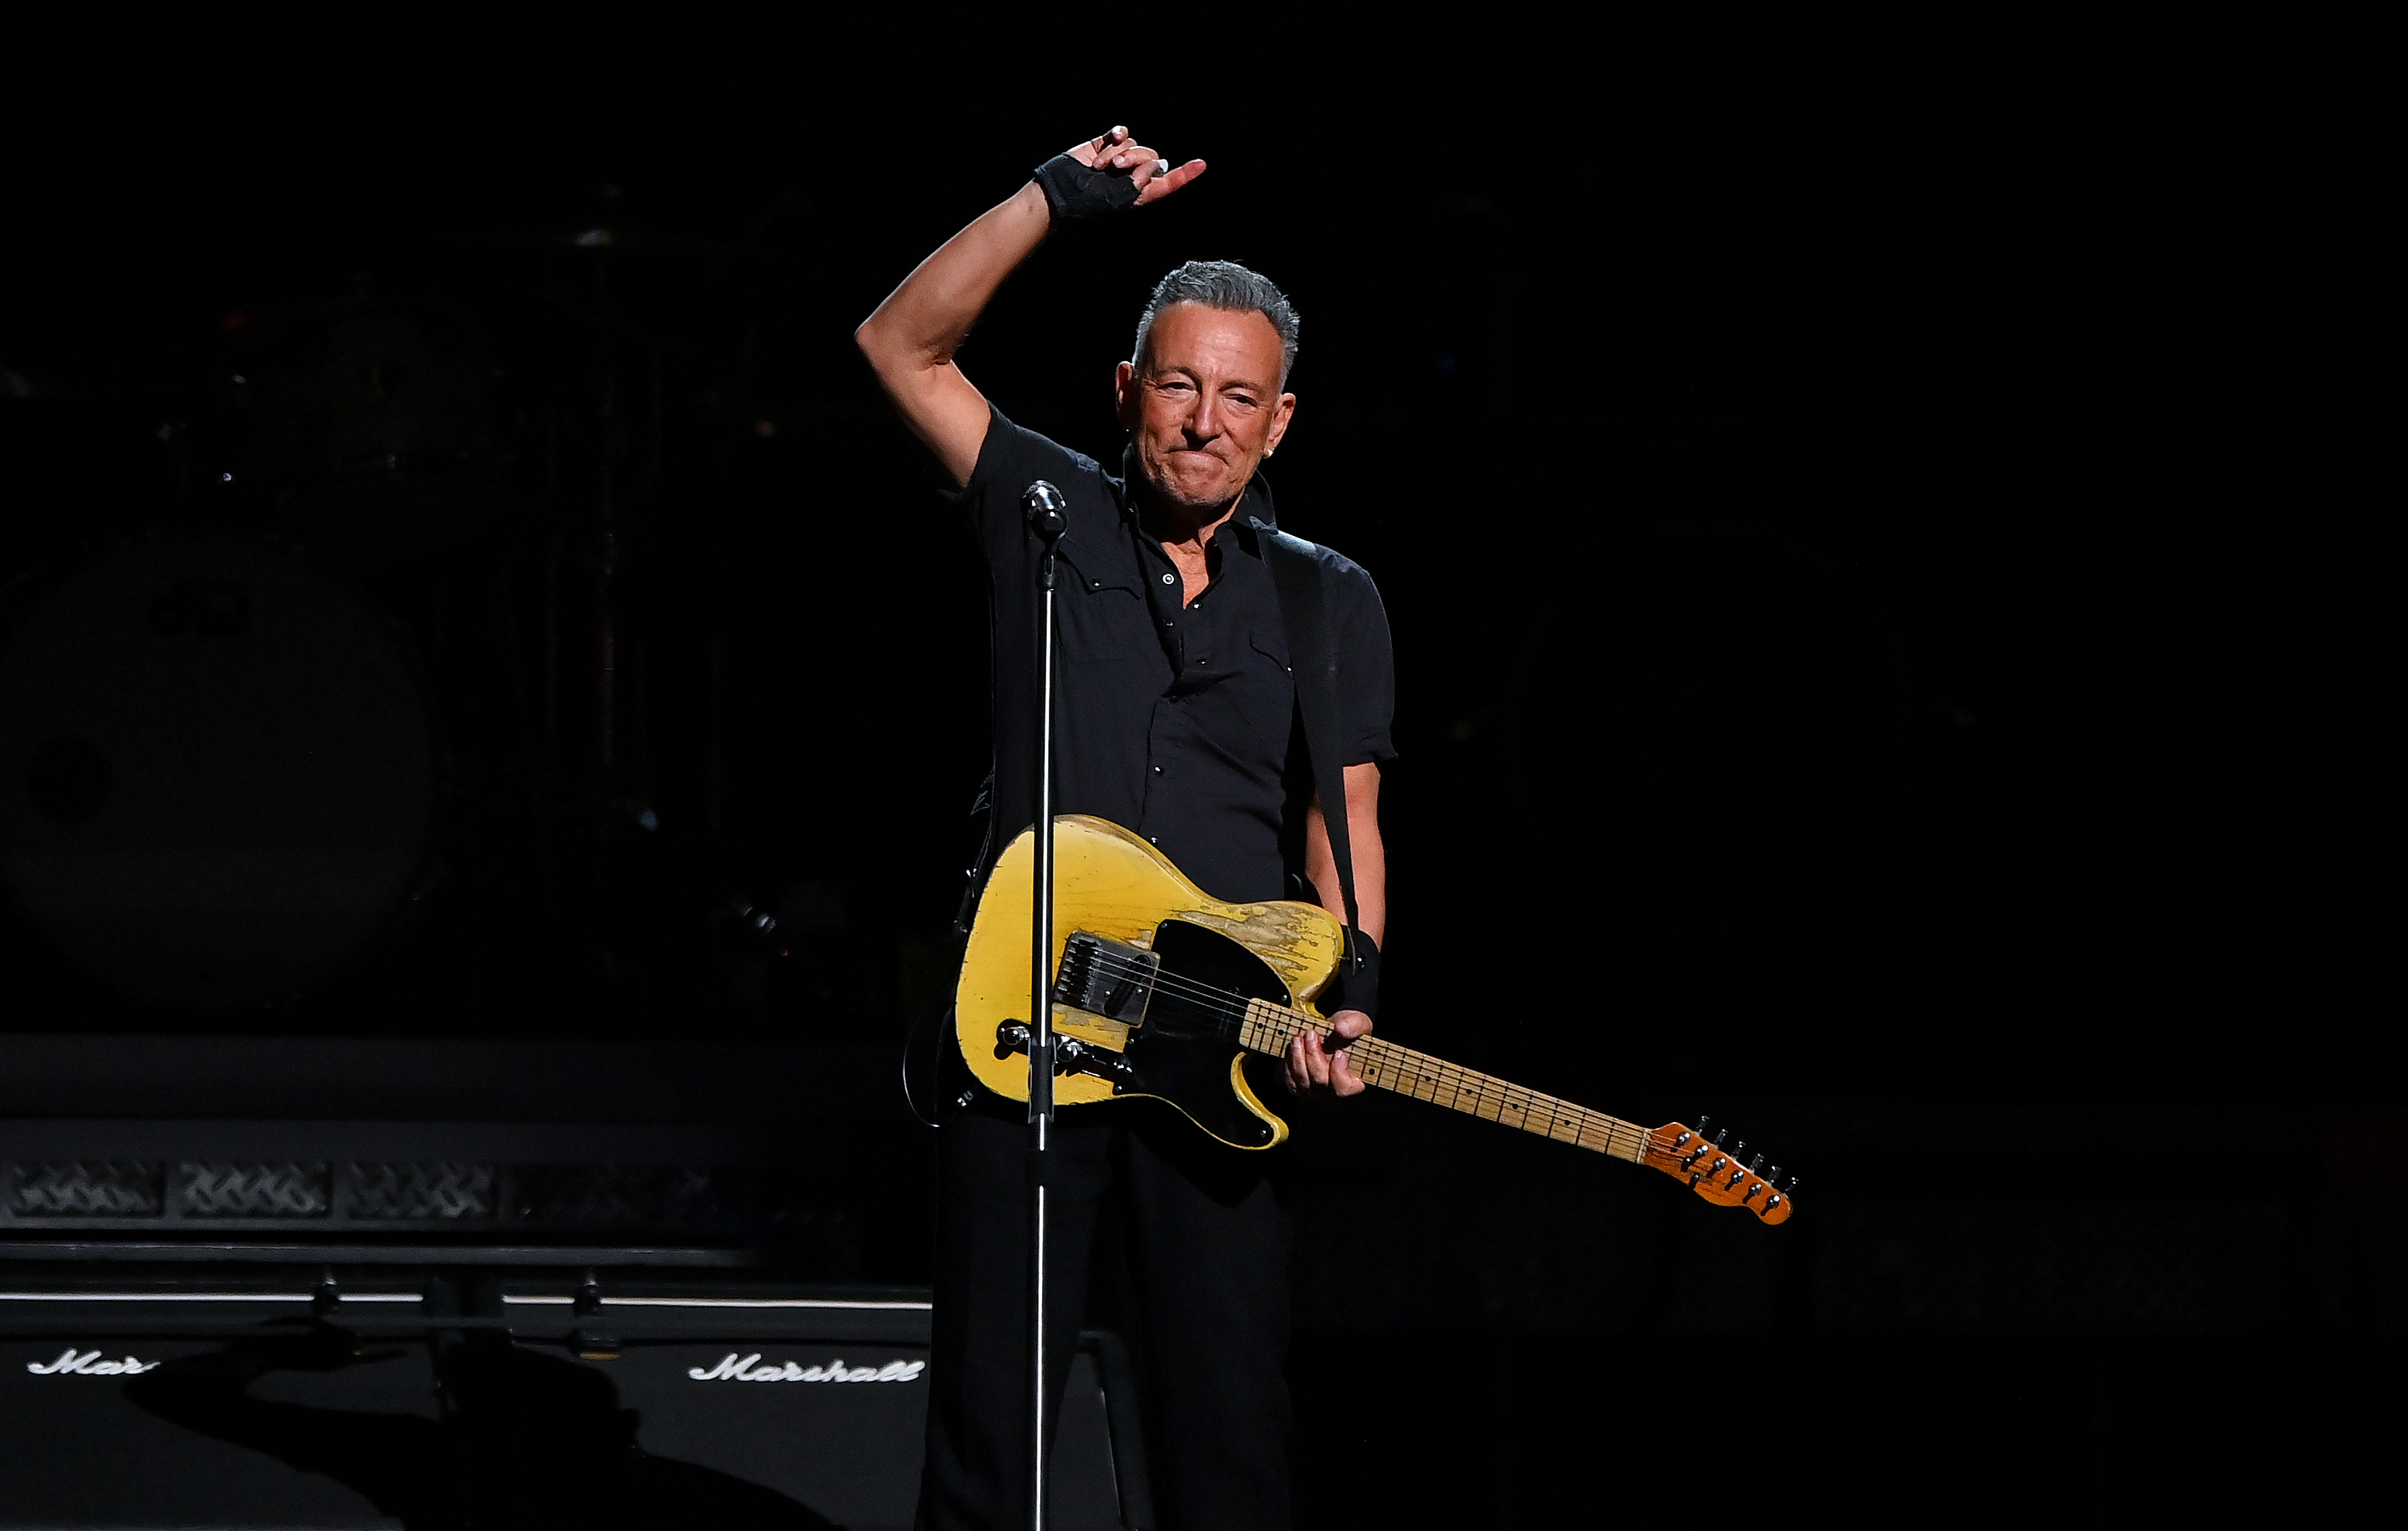 Bruce Springsteen cancels concert hours before start time due to